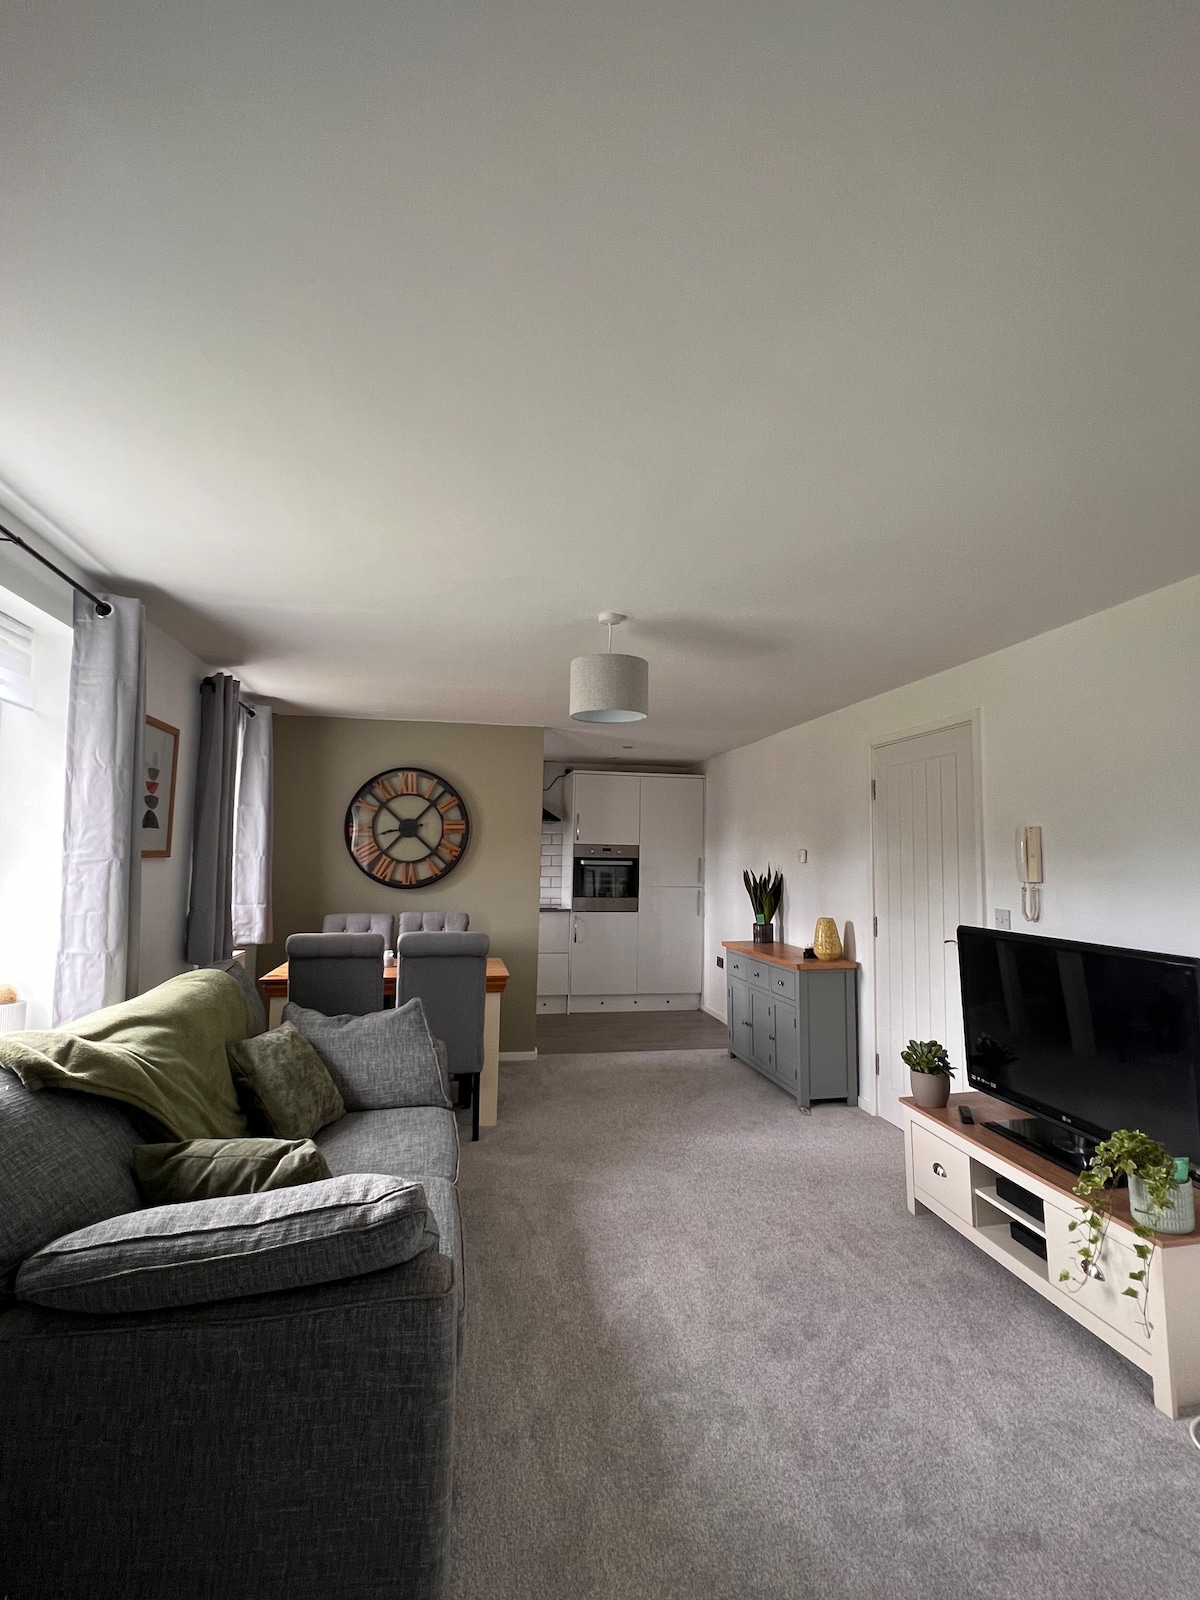 2 Bed Flat - Newcastle